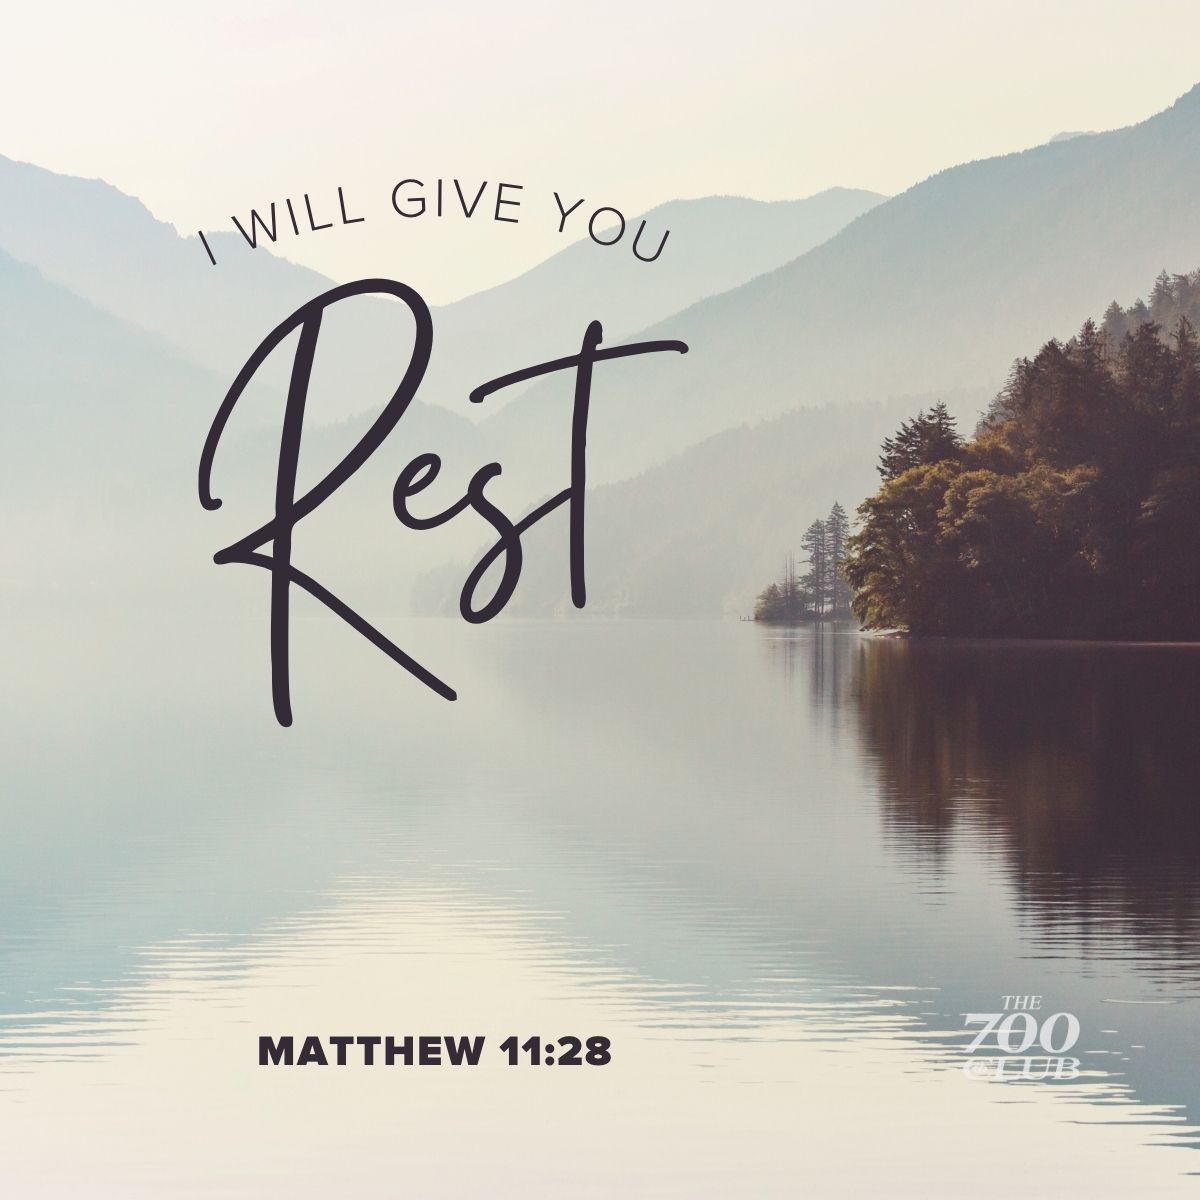 Thank You, Jesus, for the promise of rest. When we are weary, tired, stressed, or anxious, we can find true rest in You.